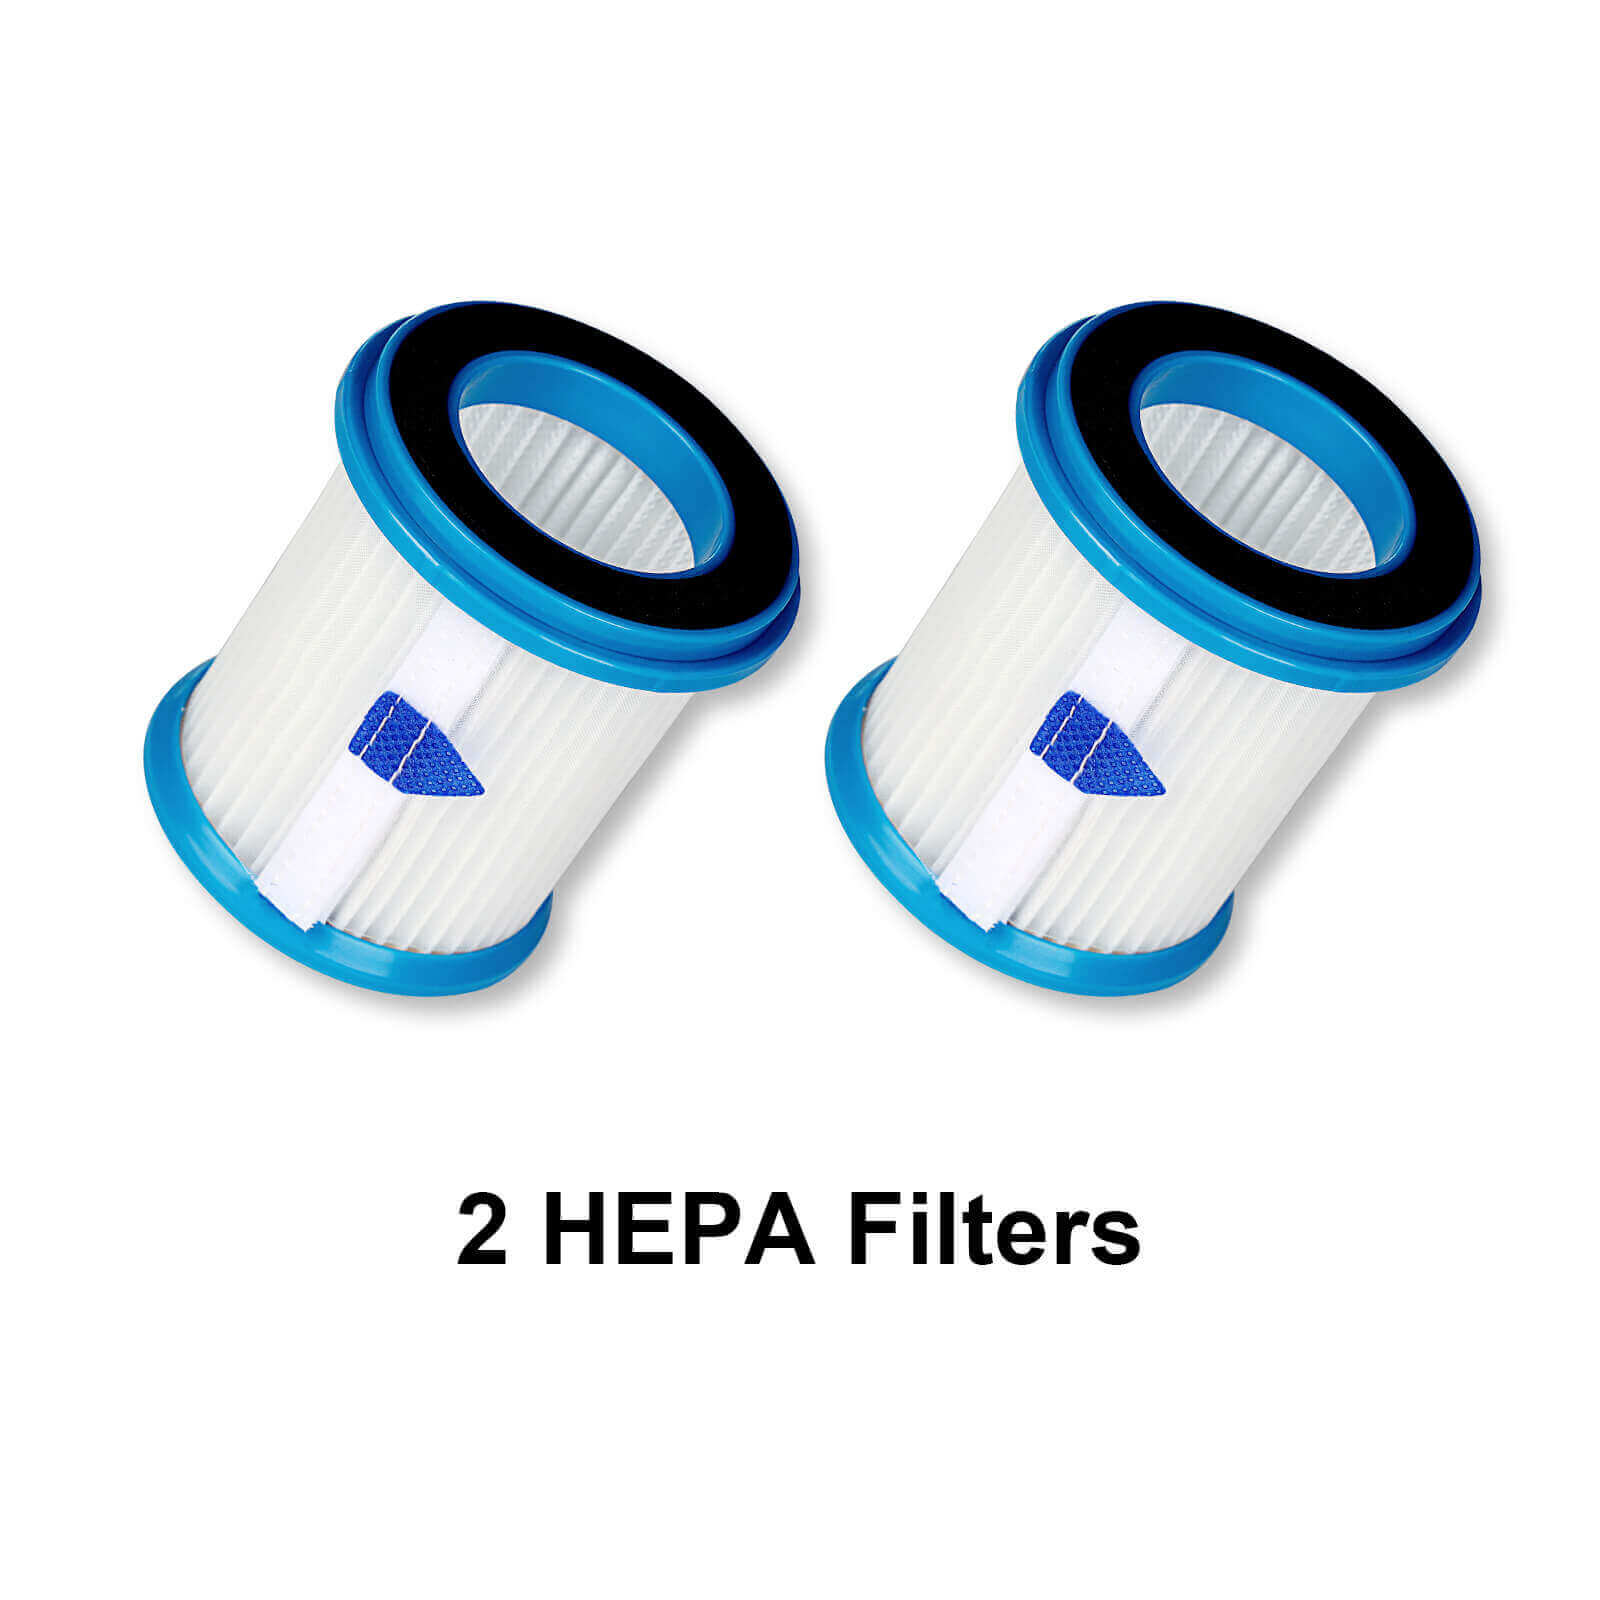 Filter - Replacement Vacuum Cleaner Filter Compatible With The